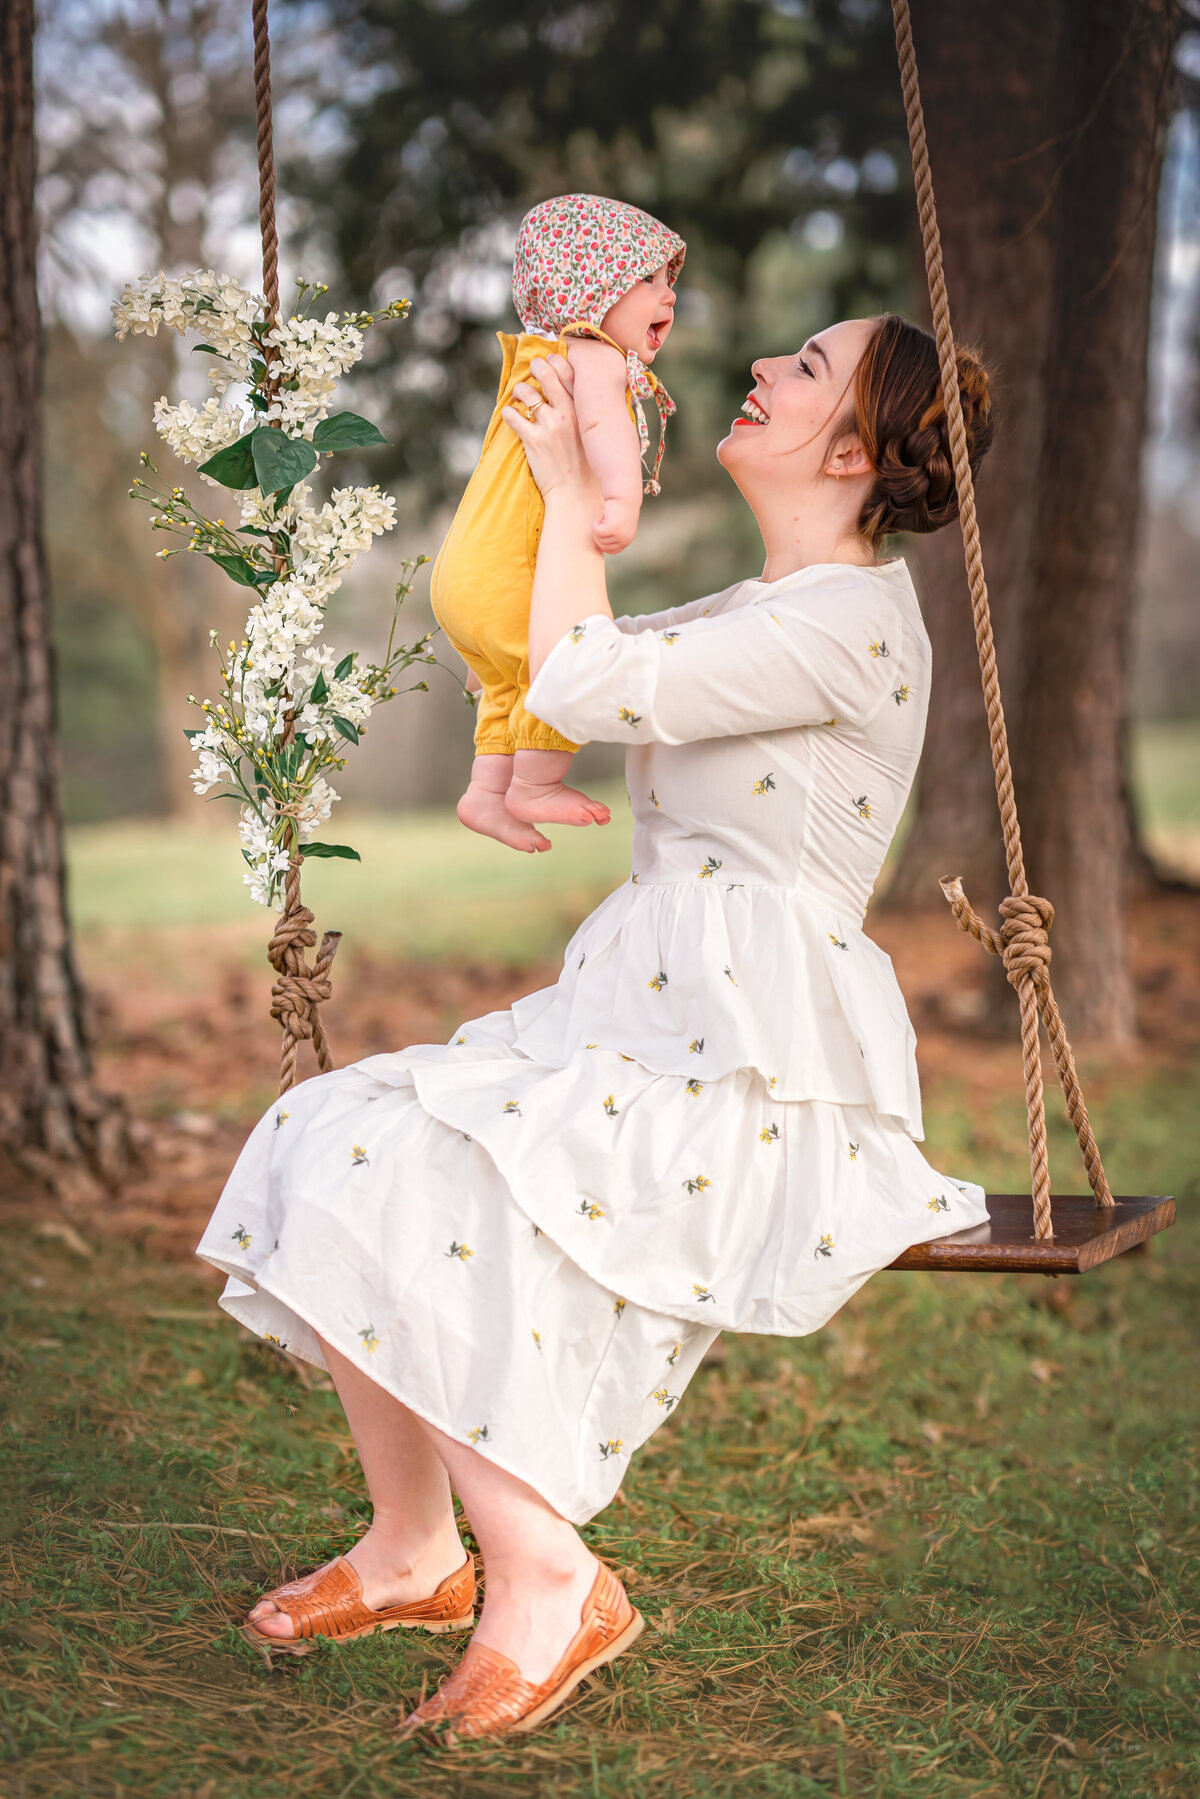 Mom in white dress sits in a wooden swing while she holds her baby.